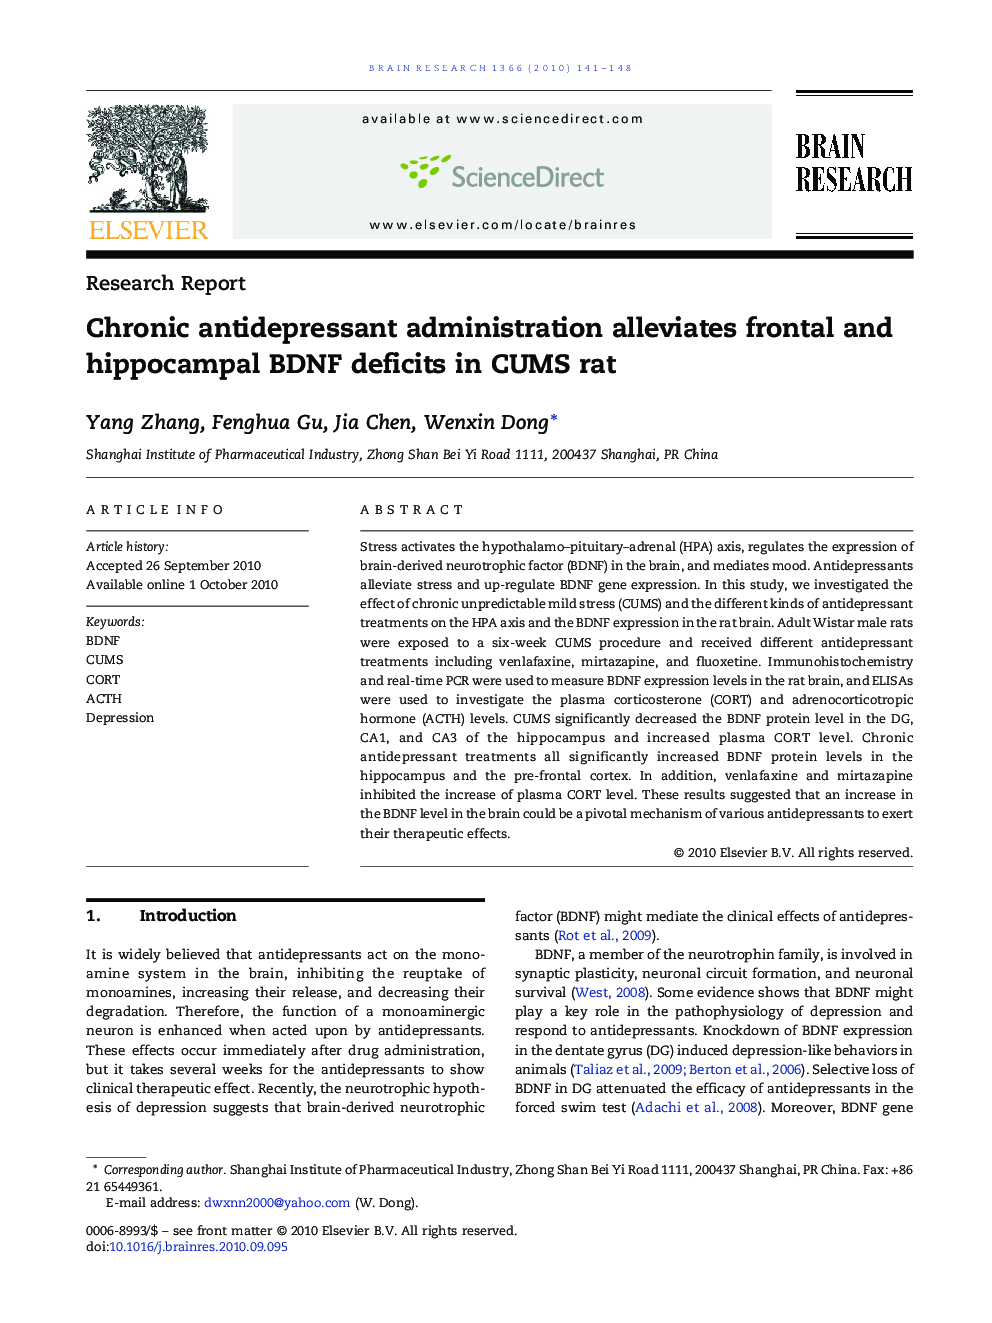 Chronic antidepressant administration alleviates frontal and hippocampal BDNF deficits in CUMS rat